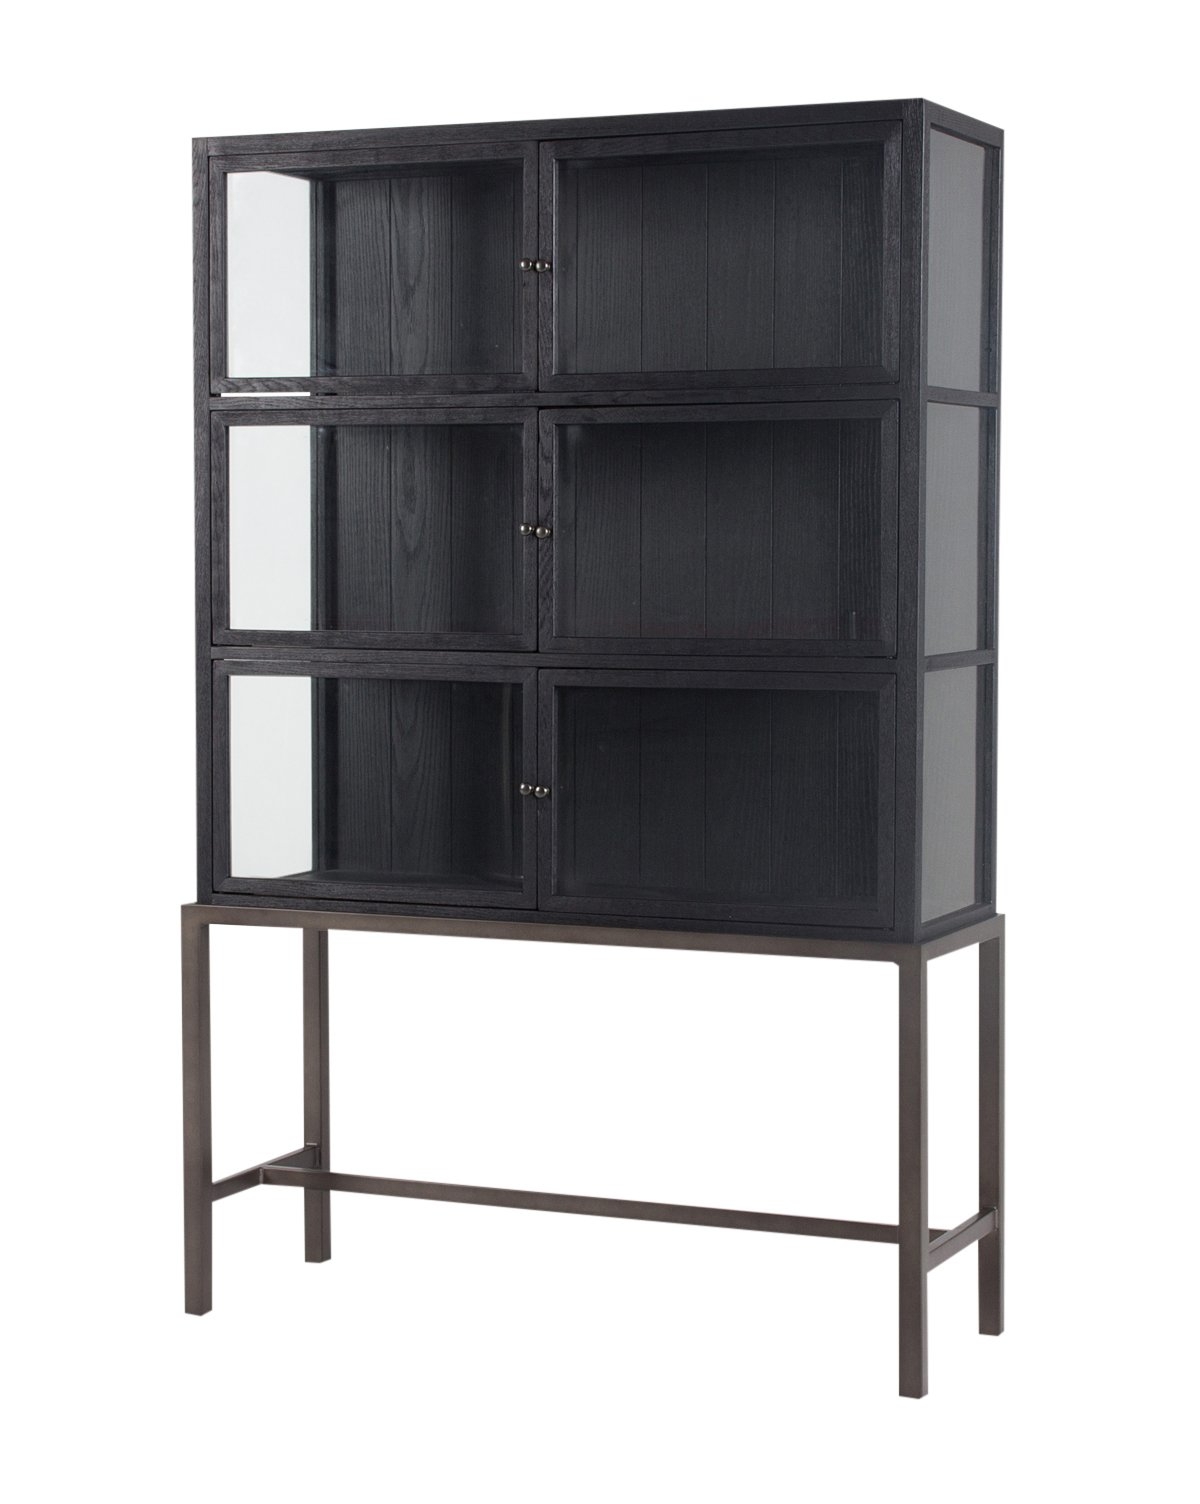 LAWLEY CABINET, DRIFTED BLACK - Image 1